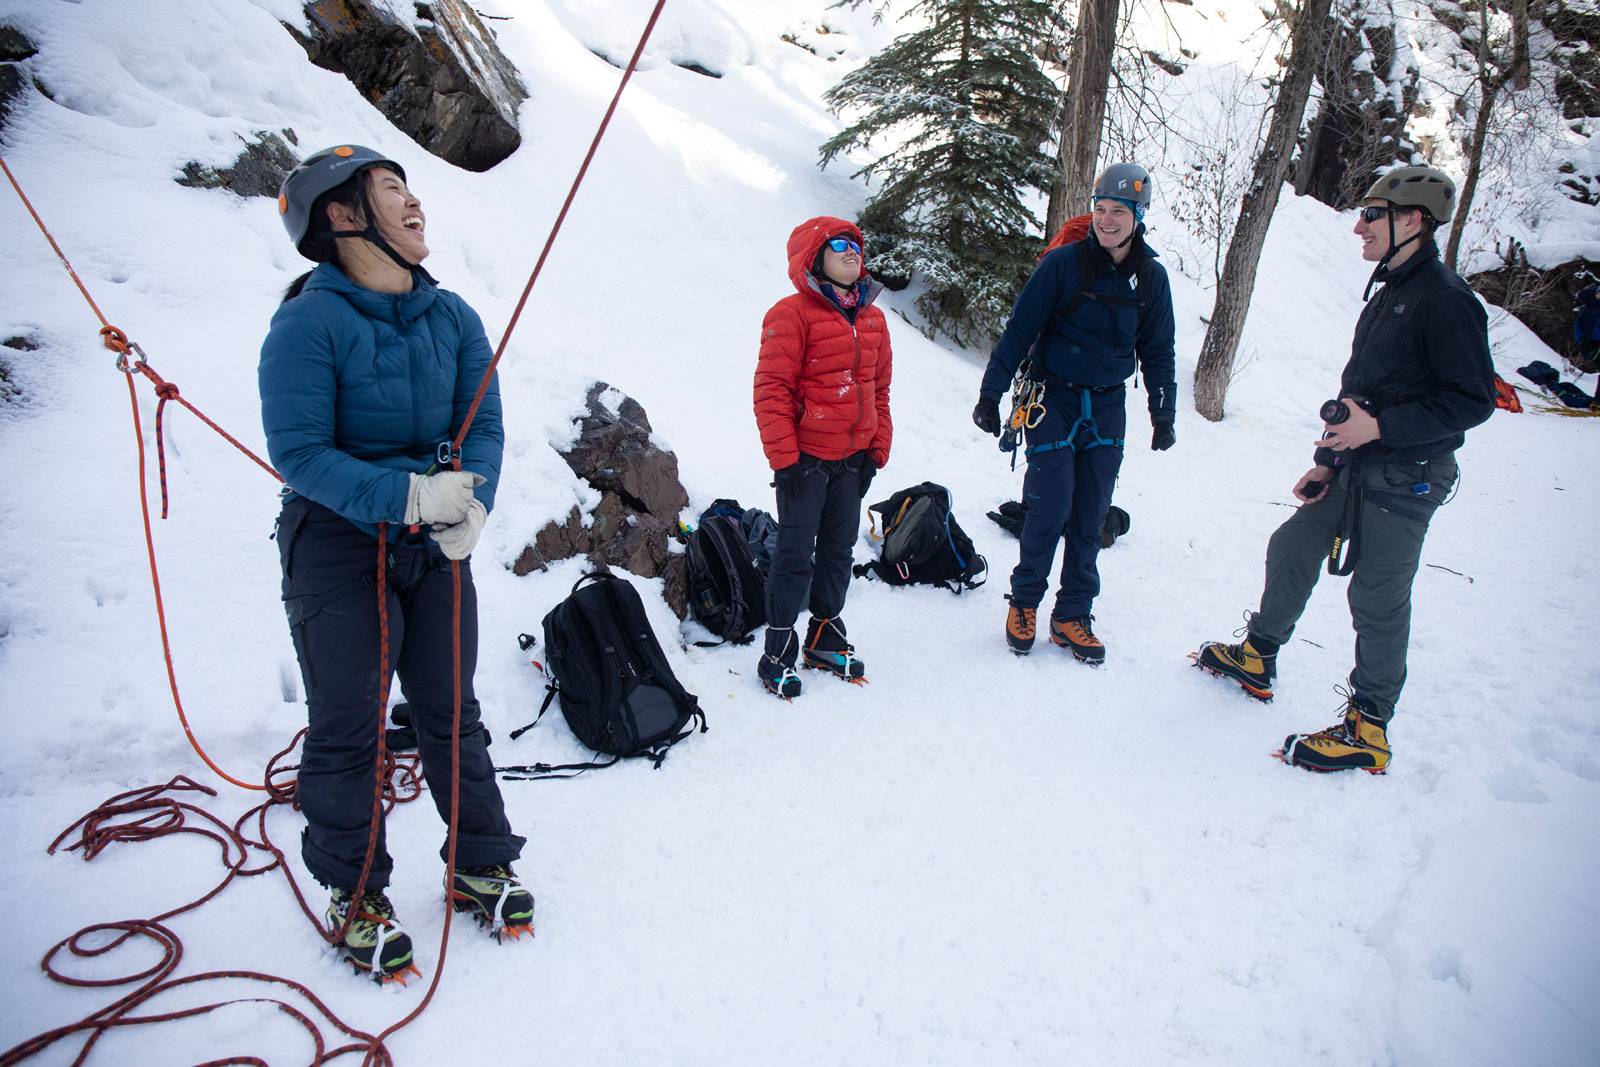 <strong>Saria Sato Bajracharya ’20</strong> laughs as she works as belay while <strong>Kaila Ablao ’21</strong>, David Crye and <strong>James Hanafee ’22</strong> watch and wait for their turns. Outdoor Education took students new to ice climbing to the Ouray Ice Park in Ouray, Colorado during a block break trip. The low-cost trip is designed for students who are new to ice climbing and might not otherwise be able to try out the sport due to the investment required to take lessons and purchase or rent equipment.